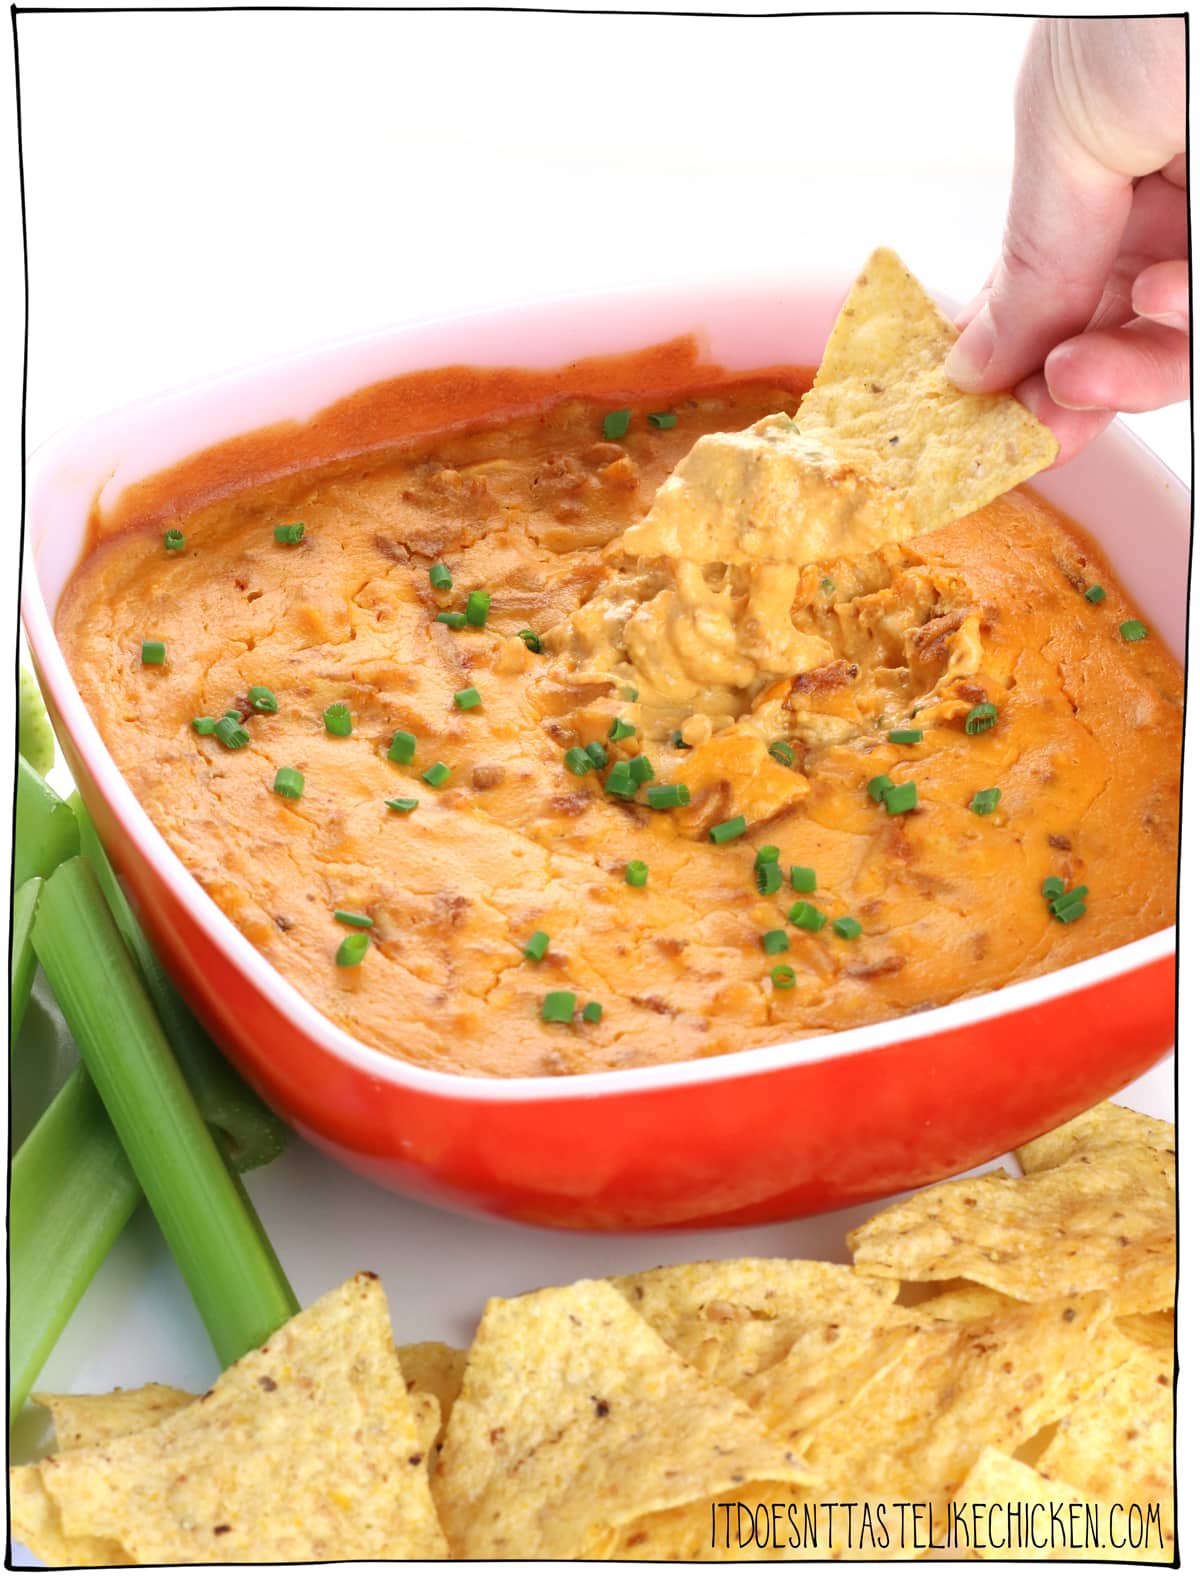 Vegan Buffalo Tofu Dip! This vegan buffalo chicken dip, tastes just like the classic, but better because it's easy to make, dairy-free, gluten-free, way healthier, make-ahead, and super delicious. Creamy, cheesy, spicy goodness perfect for any game day, BBQ, party, or movie night. #itdoesnttastelikechicken #veganrecipes